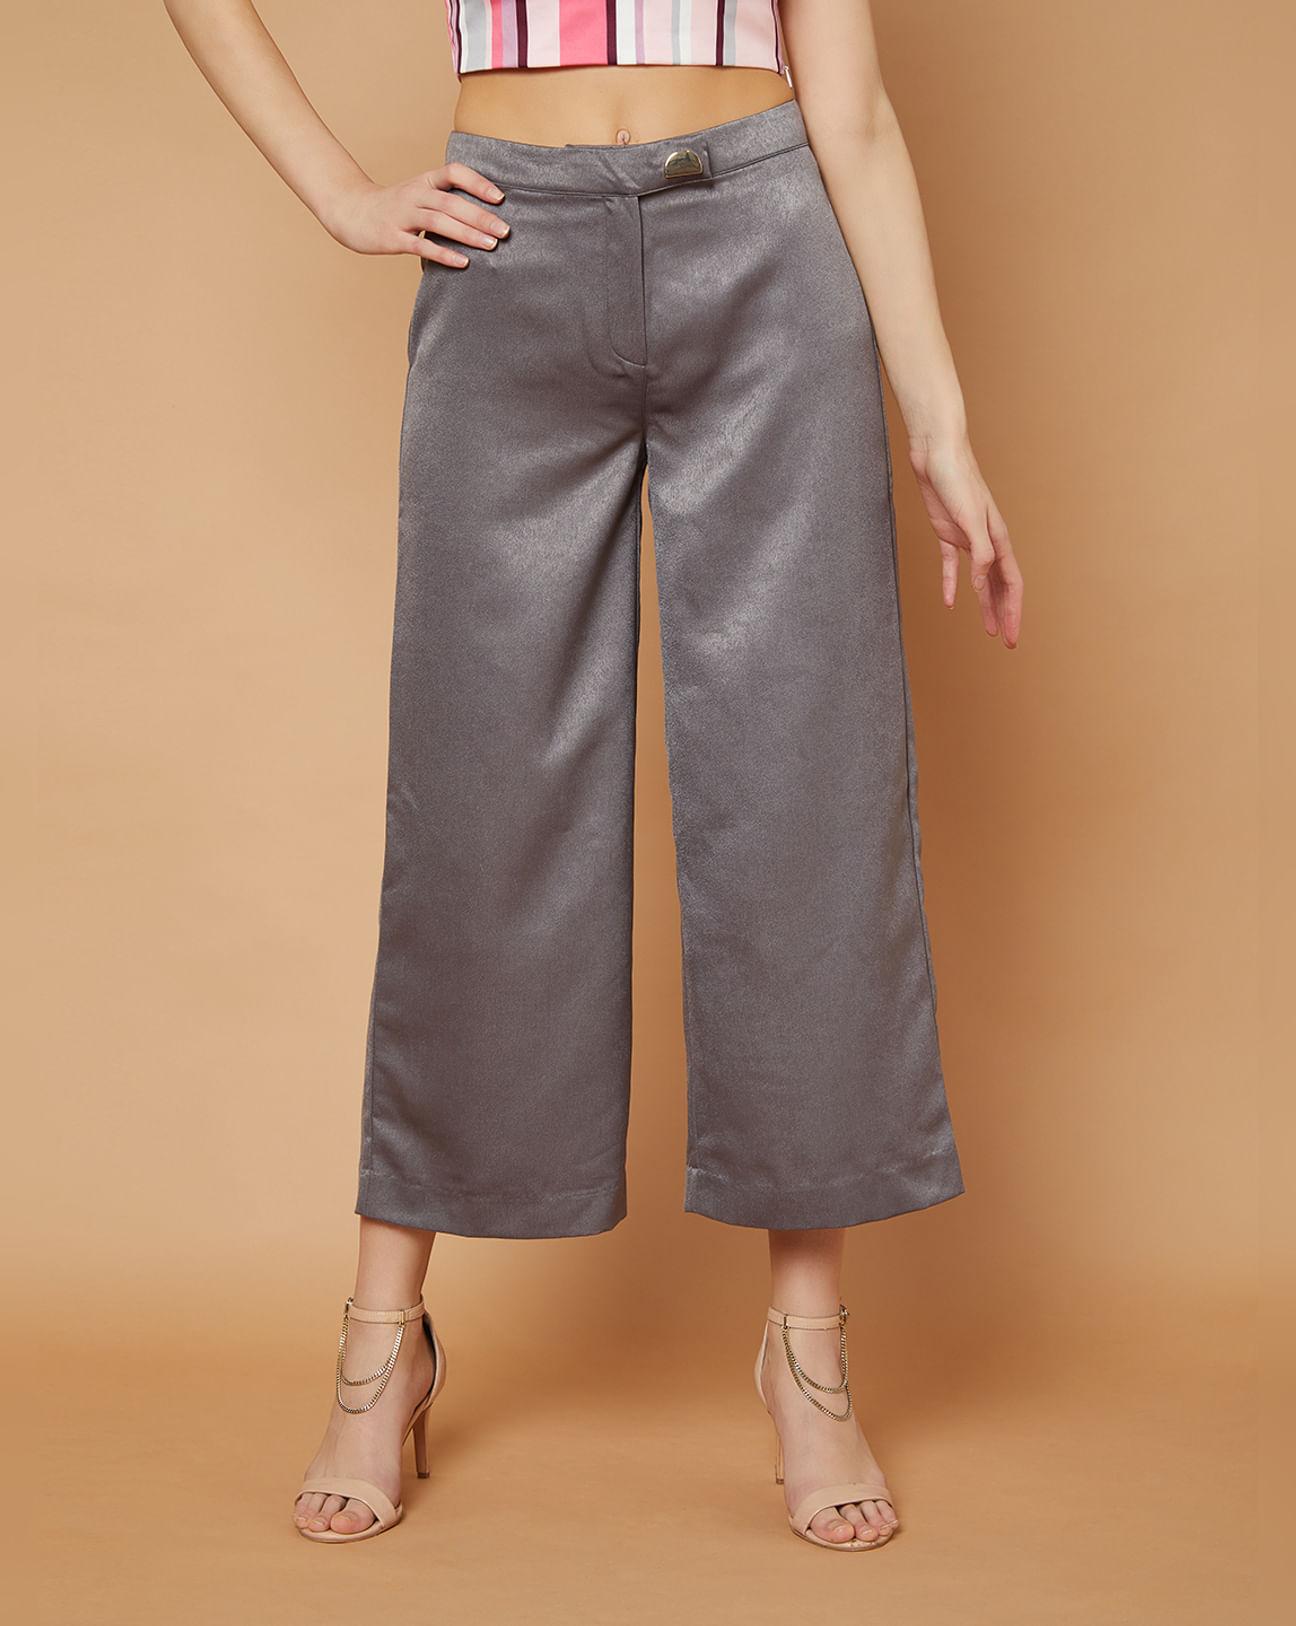 marquee grey mid rise culottes